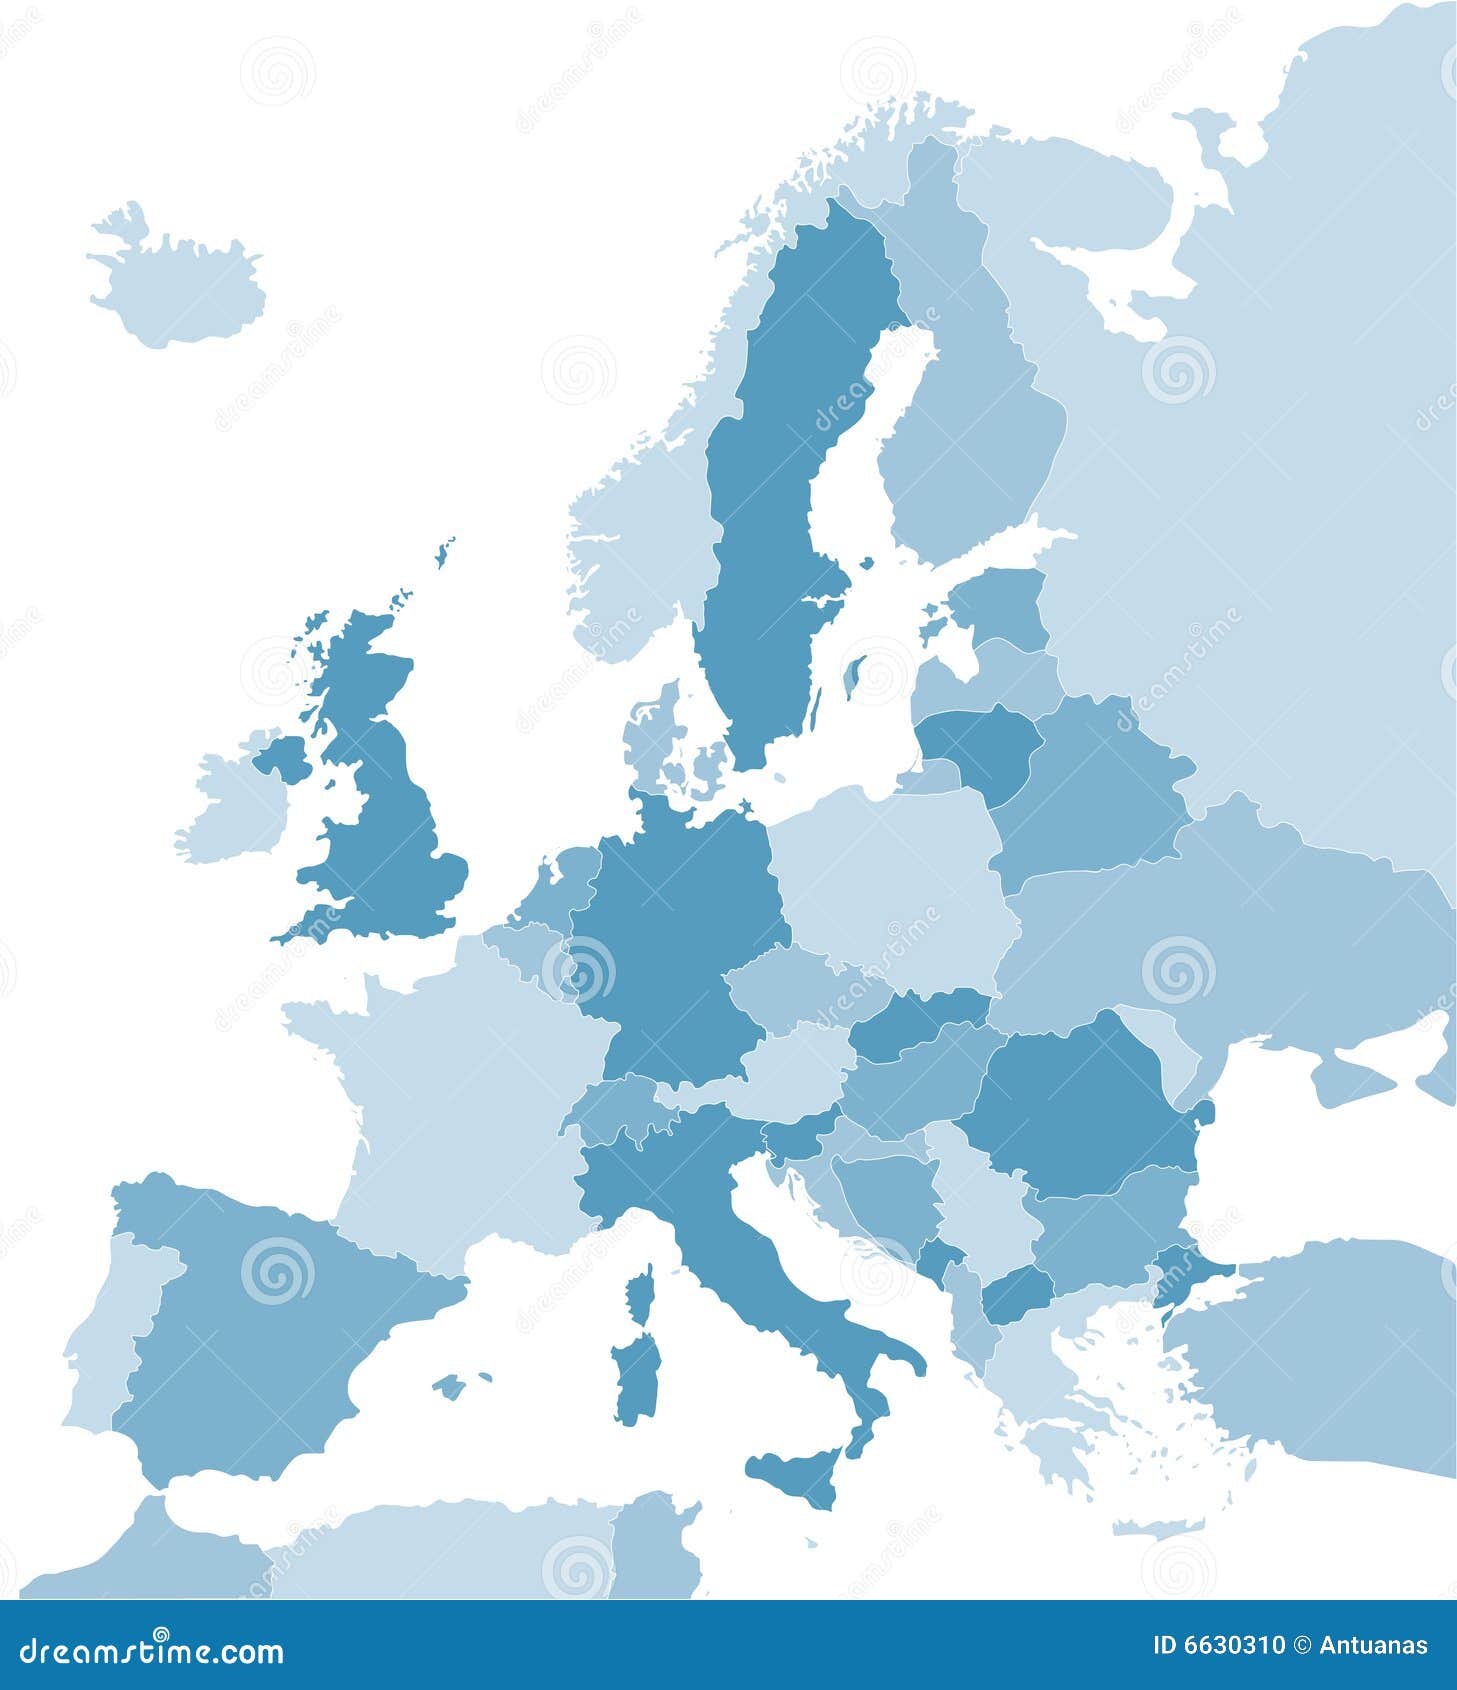 map of europe in blue